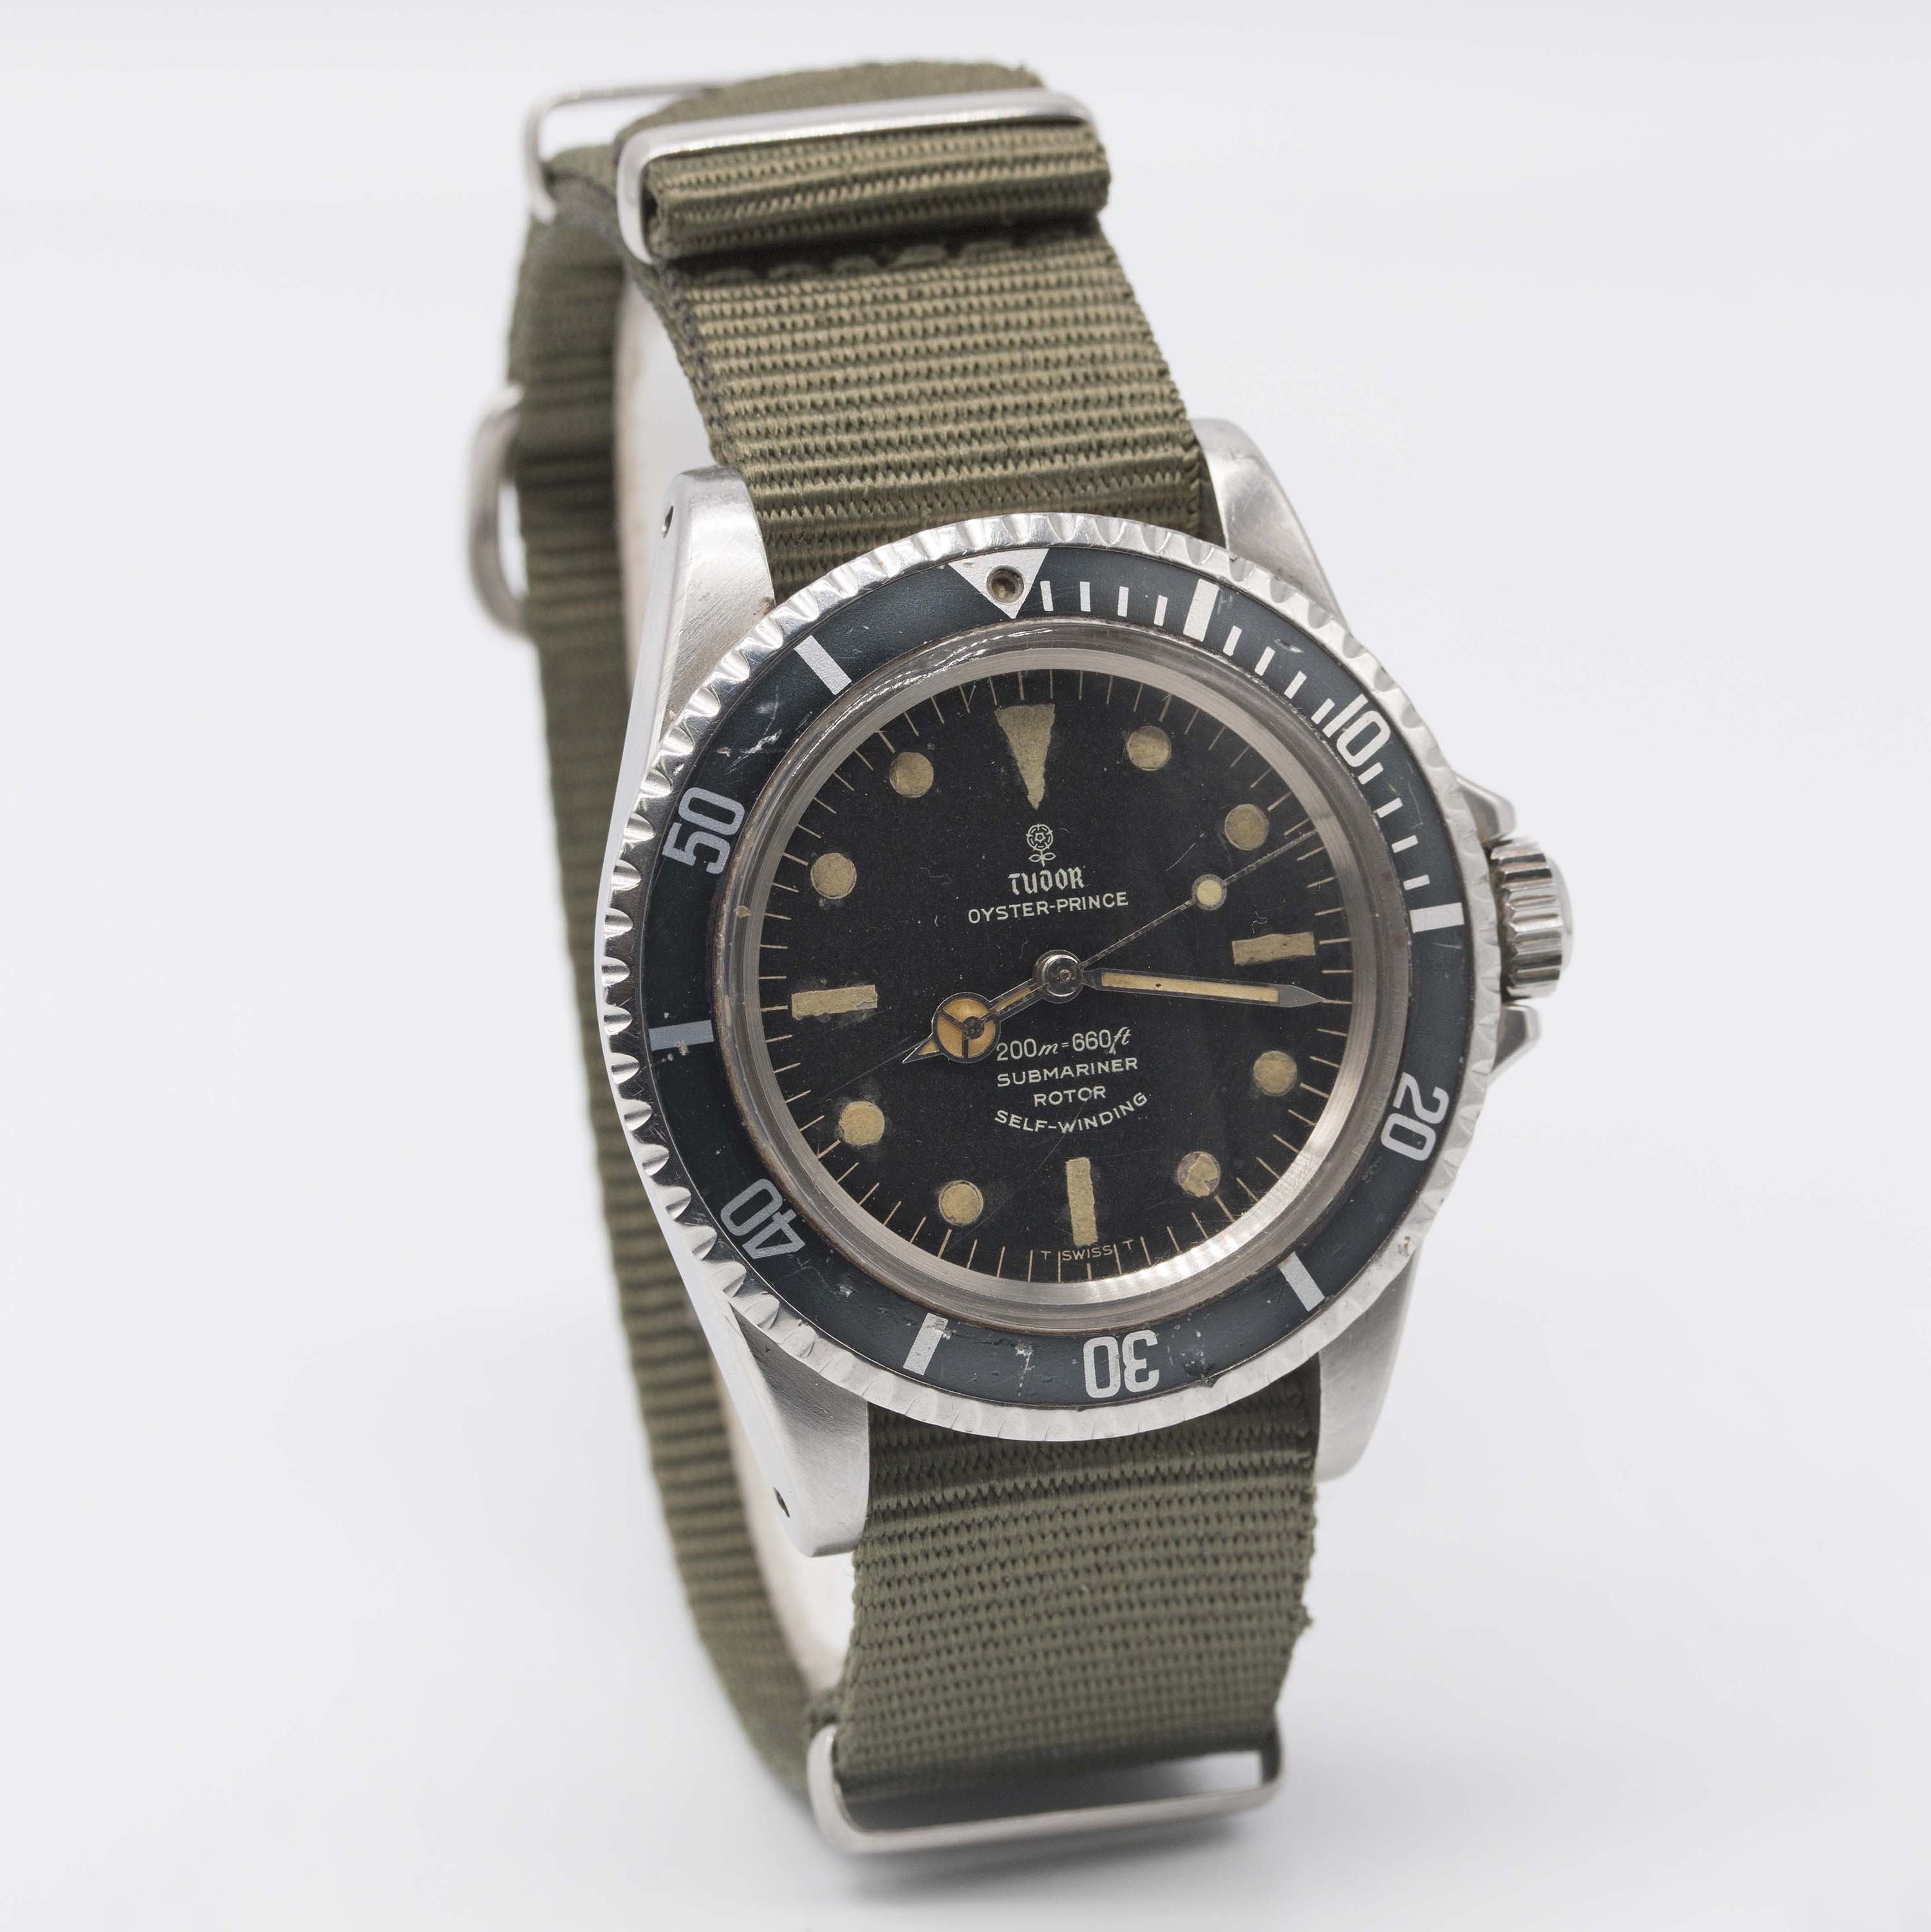 A GENTLEMAN'S STAINLESS STEEL ROLEX TUDOR OYSTER PRINCE SUBMARINER WRIST WATCH CIRCA 1967, REF. - Image 5 of 10